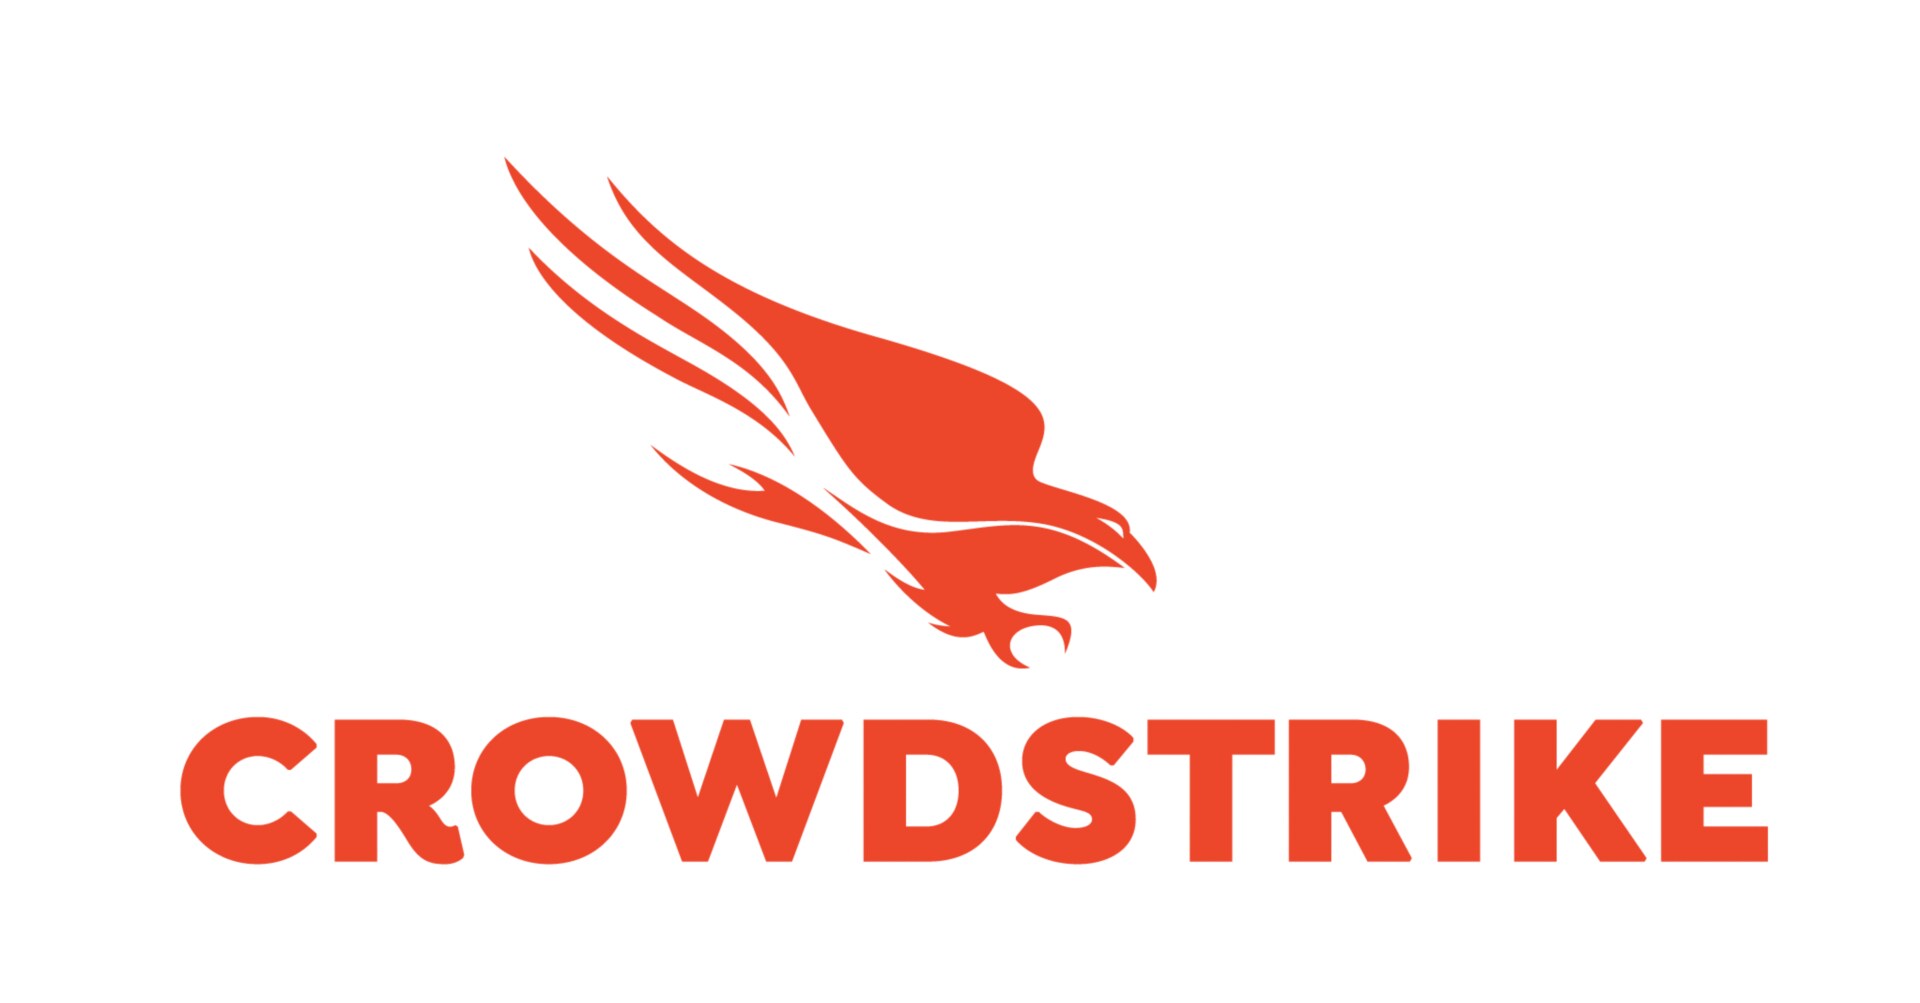 CrowdStrike 12-Month Falcon Insight XDR SSE (SWG & CASB) Connector, 7 Day